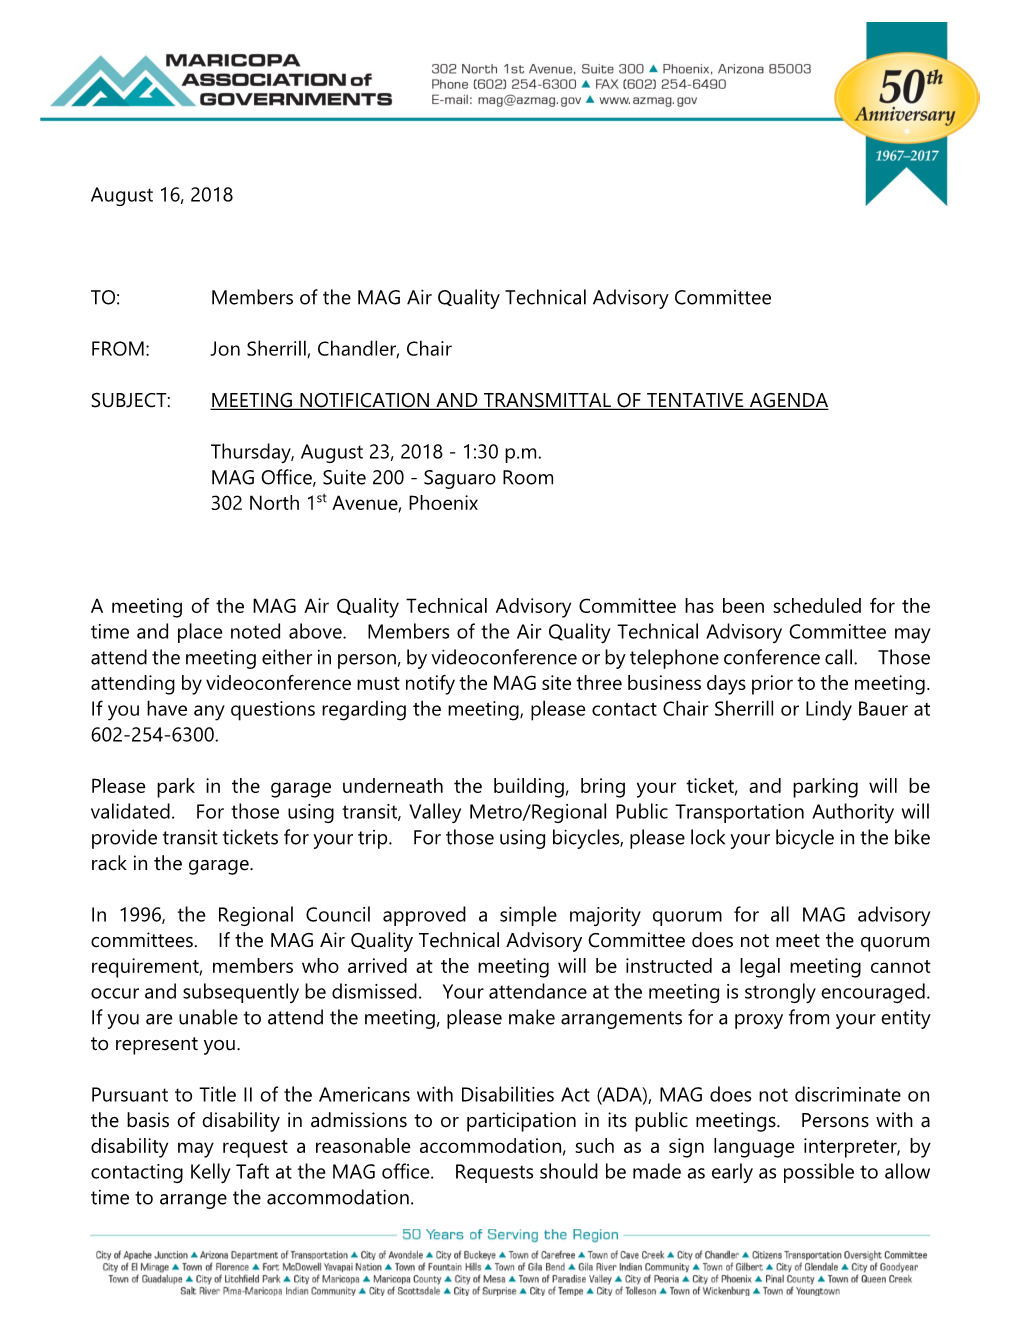 Air Quality Technical Advisory Committee 8/23/2018 Meeting